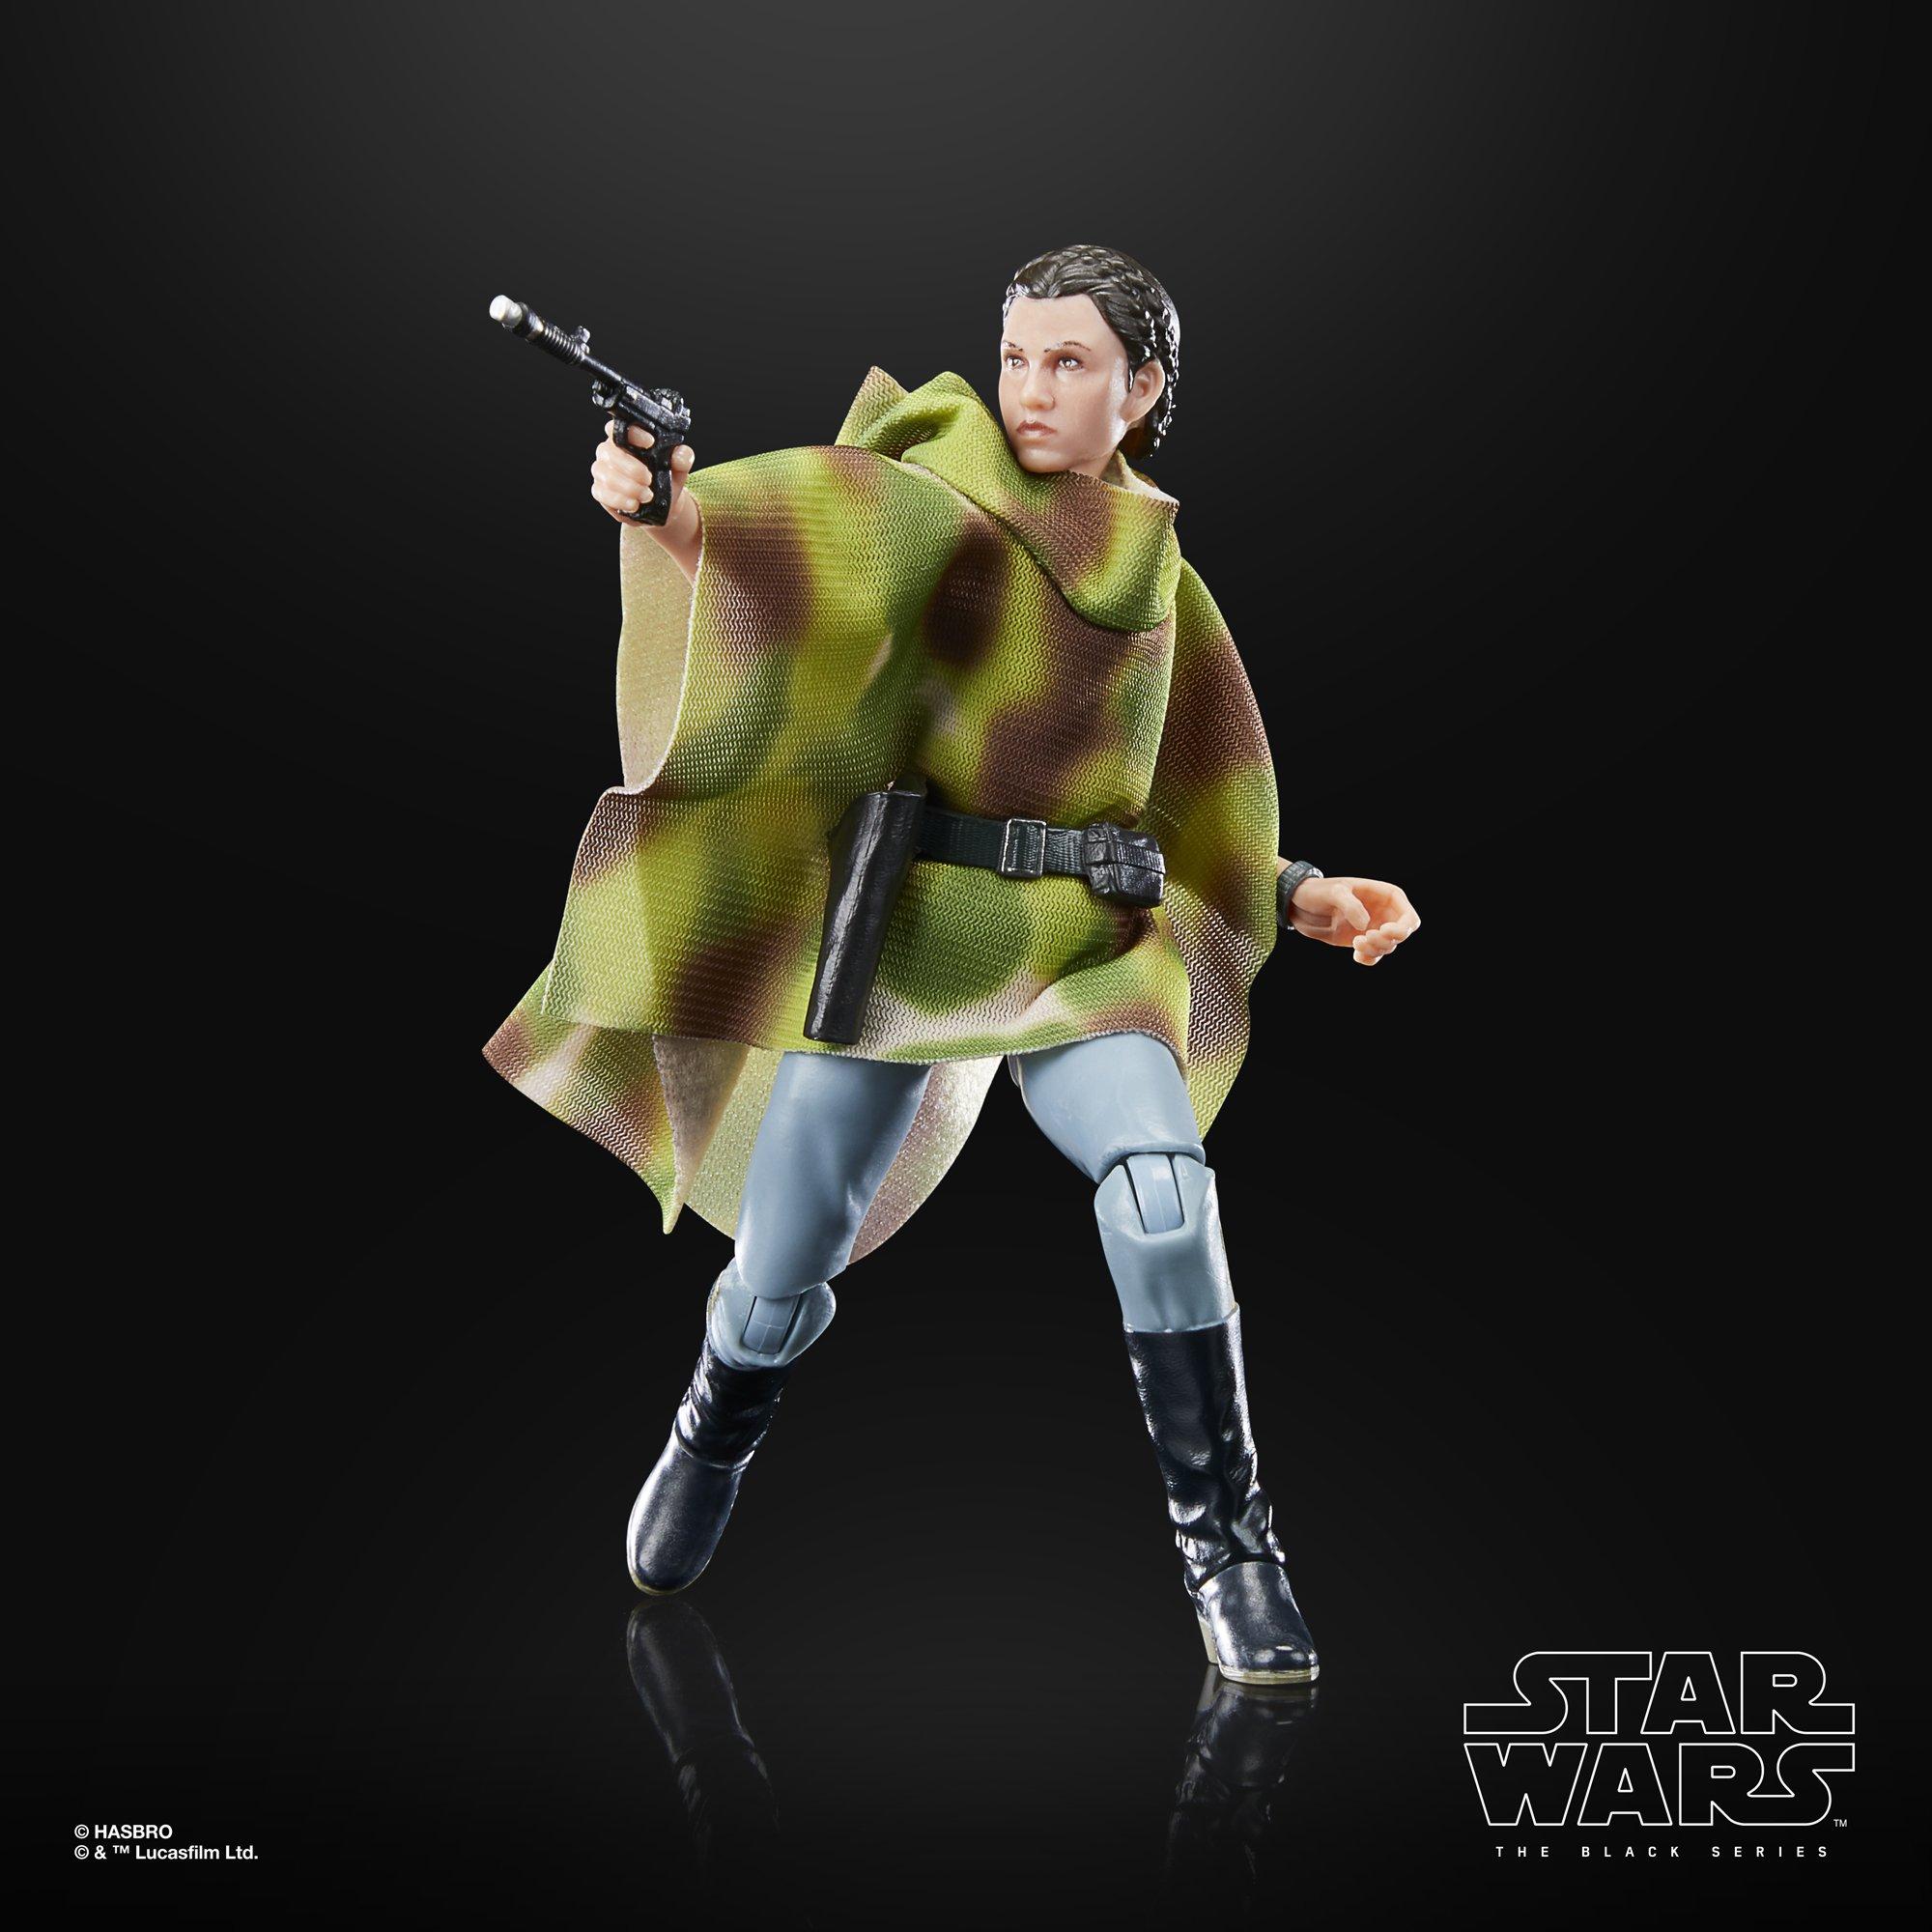 Figures of Star Wars official